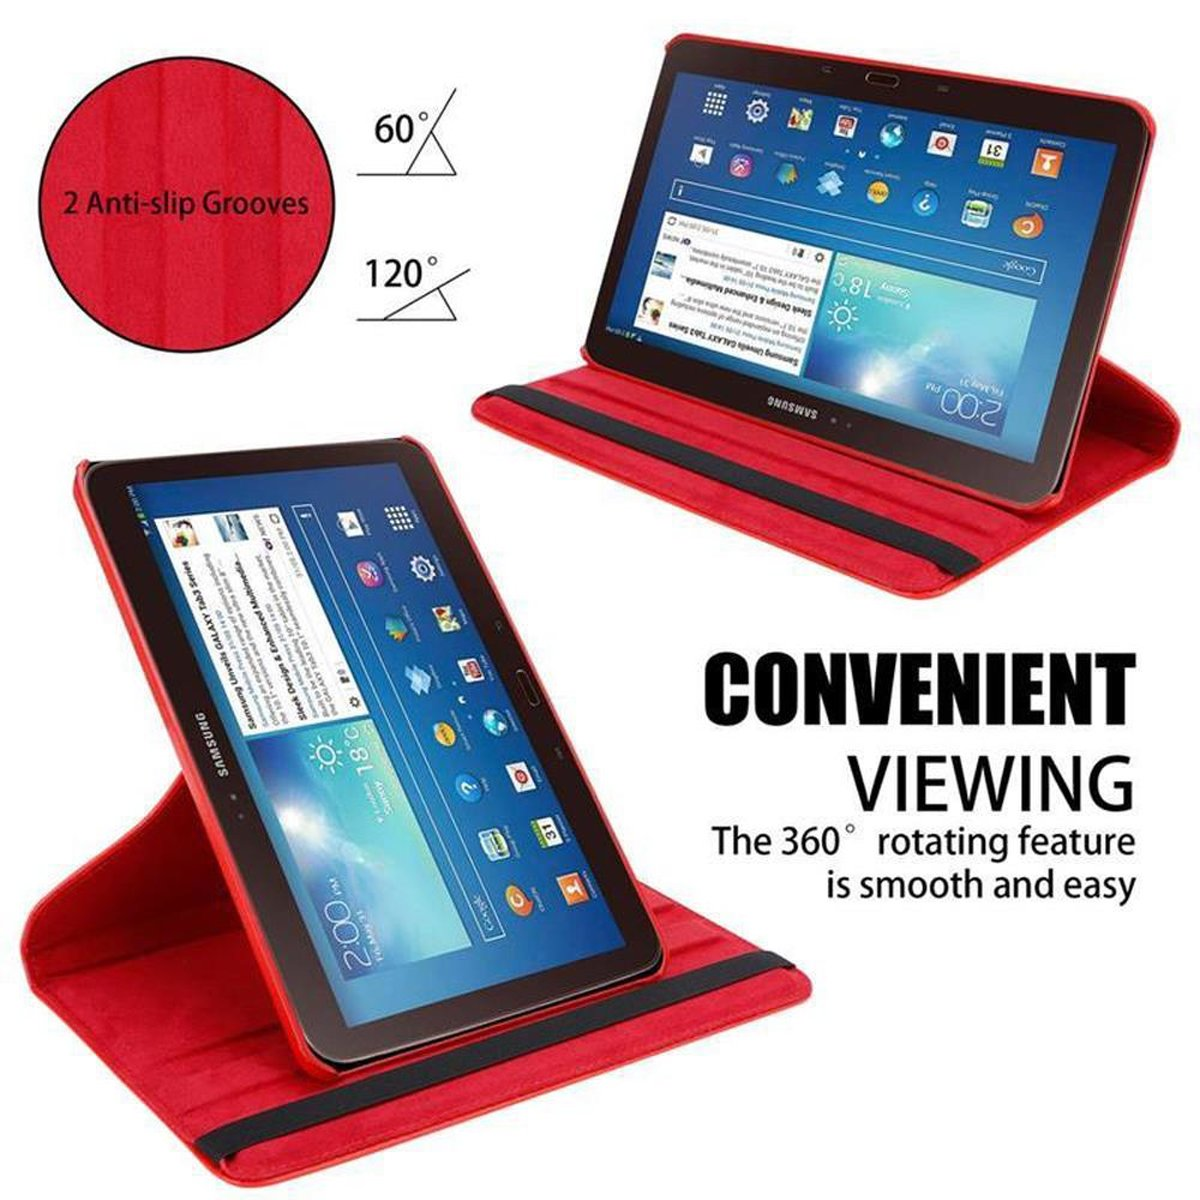 MOHN Galaxy CADORABO im Hülle Style, Book Samsung, (10.1 Tab Tablet 3 Zoll), ROT Bookcover,